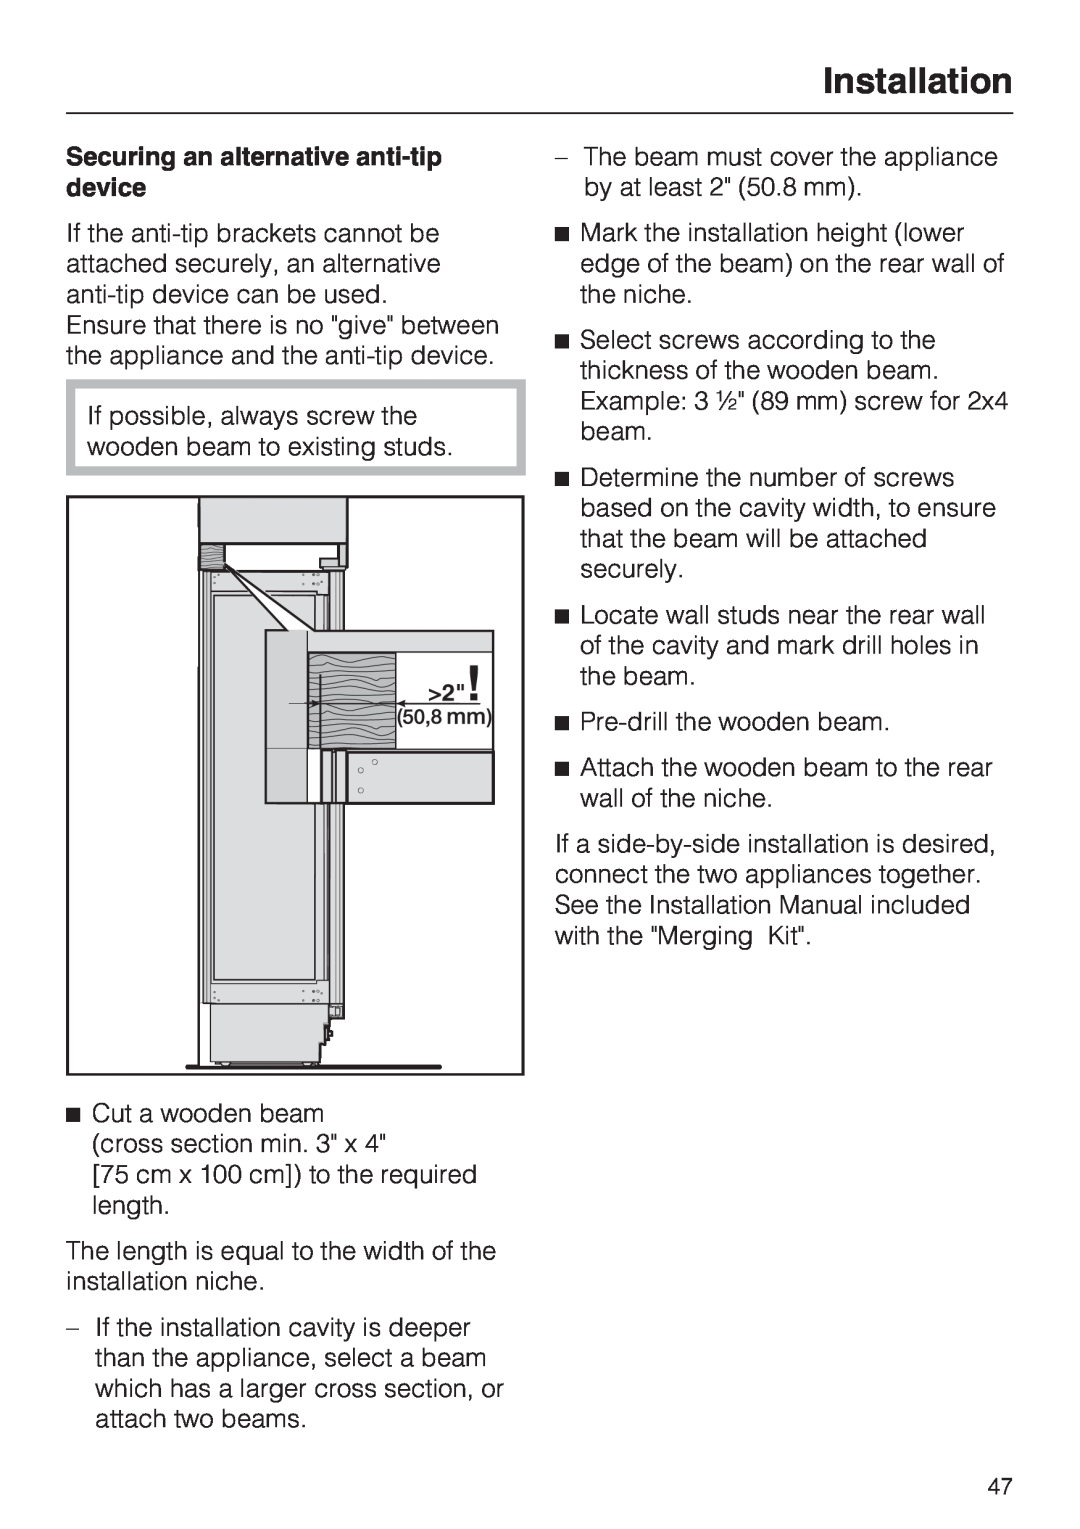 Miele KWT1601SF, KWT1611SF installation instructions Securing an alternative anti-tipdevice, Installation 